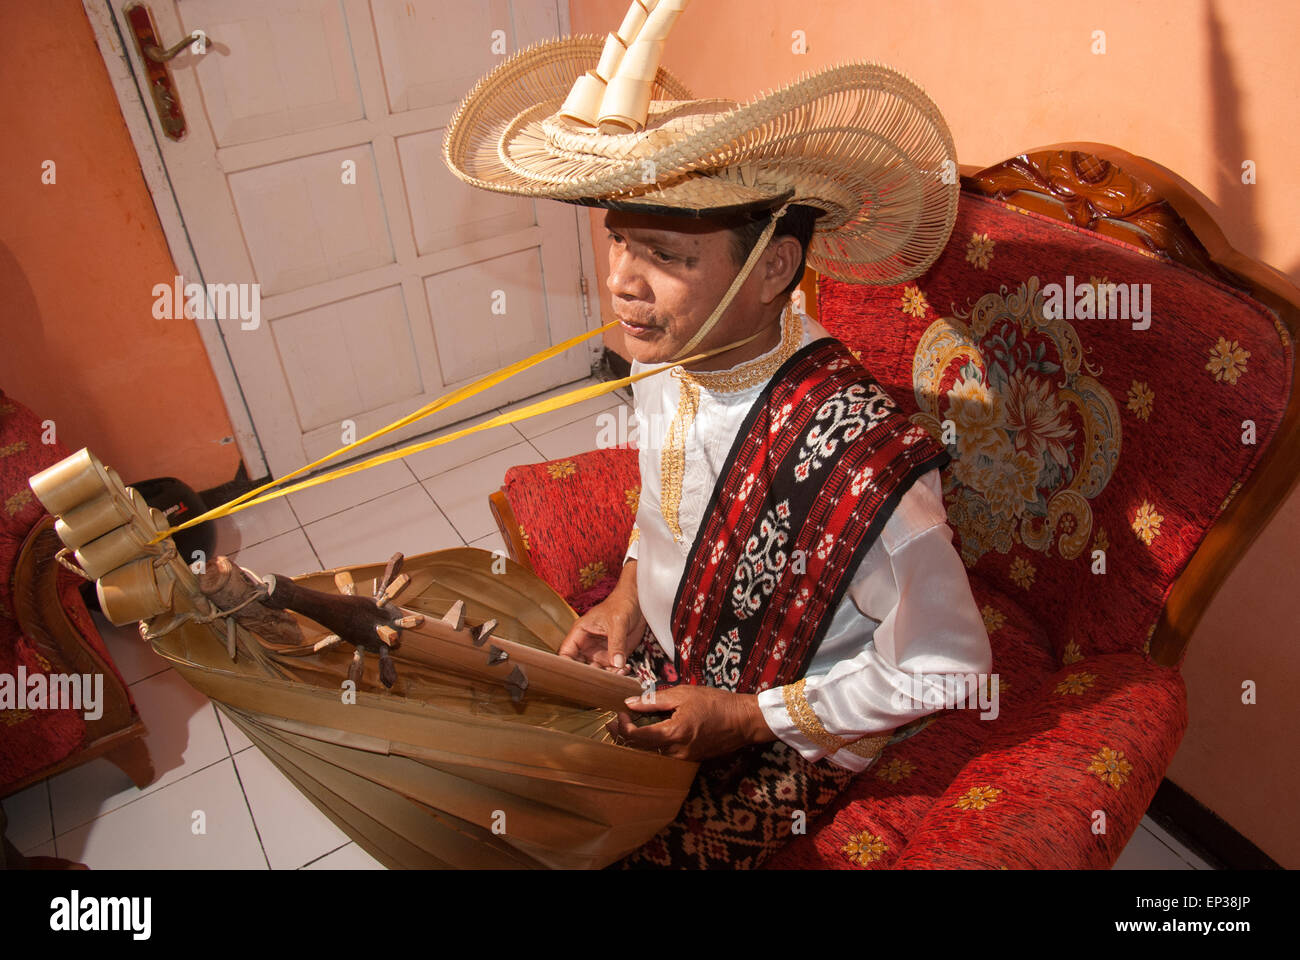 Man wearing traditional clothes as he plays sasando music instrument of Rote Island, Indonesia. Stock Photo